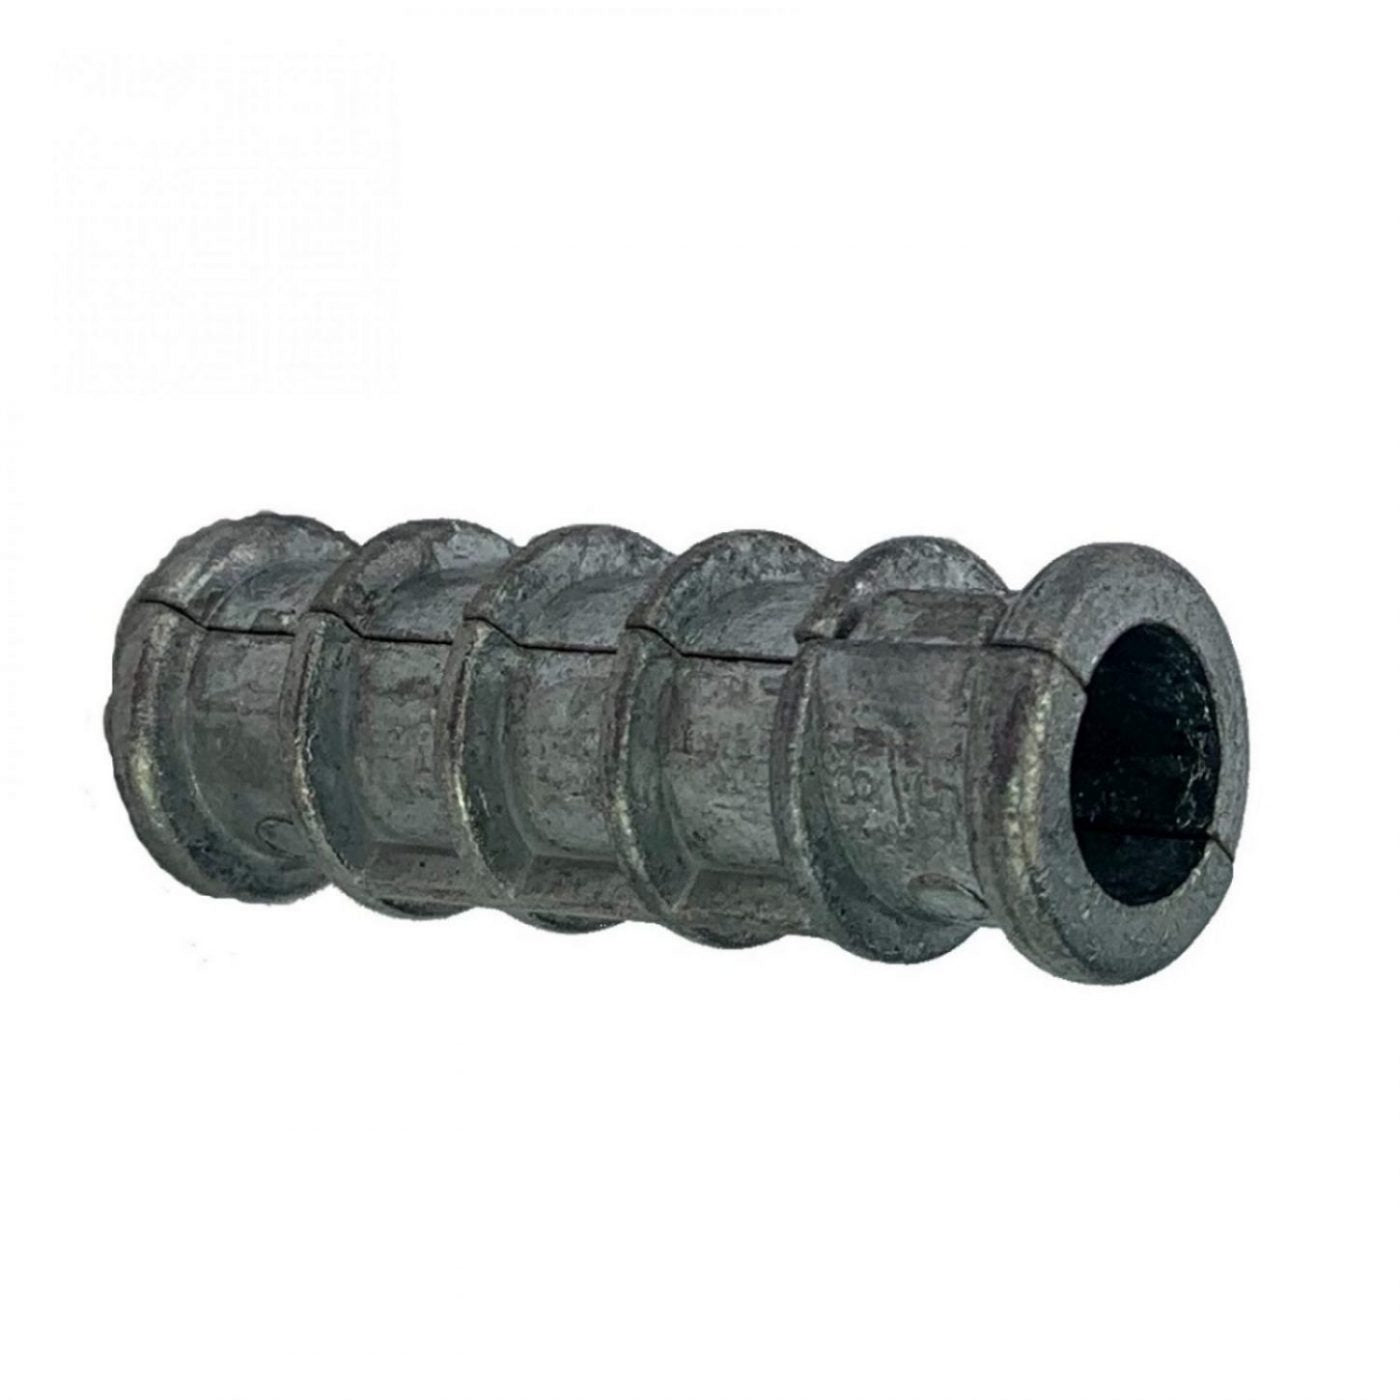 Lag Shield Anchor - For 3/8" Inch Lag Screws - 1-3/4" Inch - Cast Zinc Alloy - Sold Individually